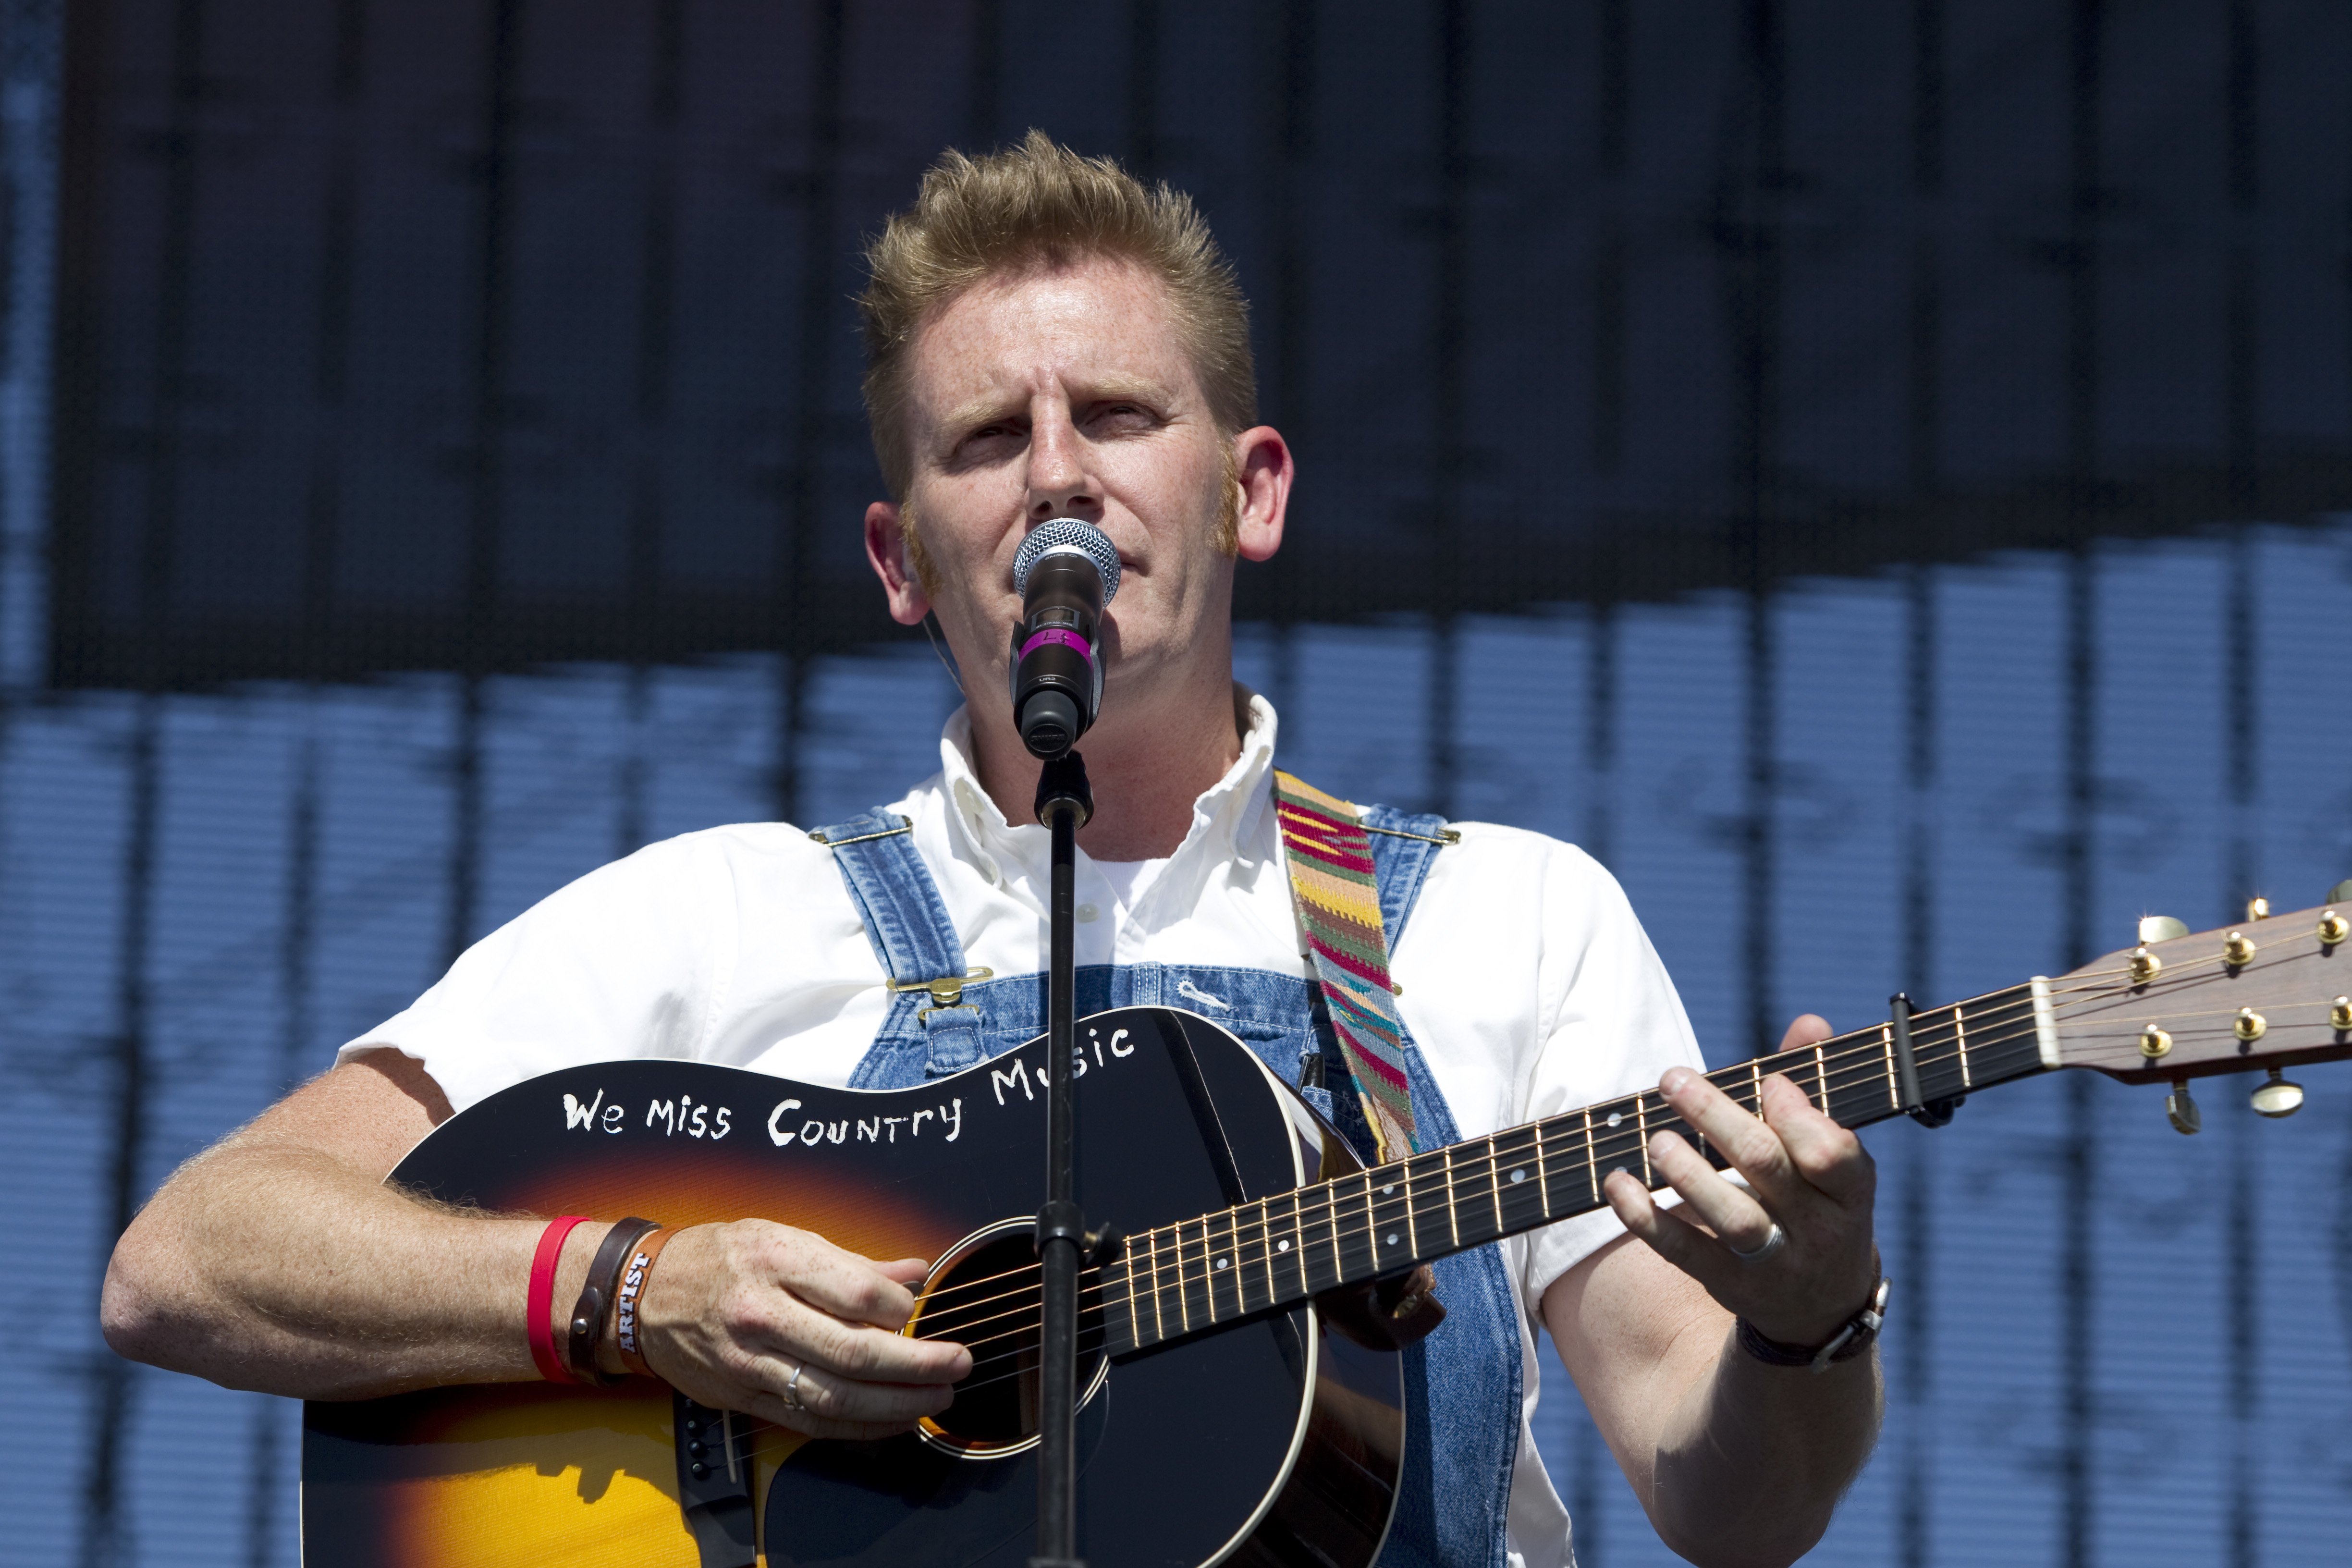 Rory Feek of Joey + Rory performs during the first day of the Stagecoach Festival in Indio, California, on April 24, 2010. | Source: Getty Images